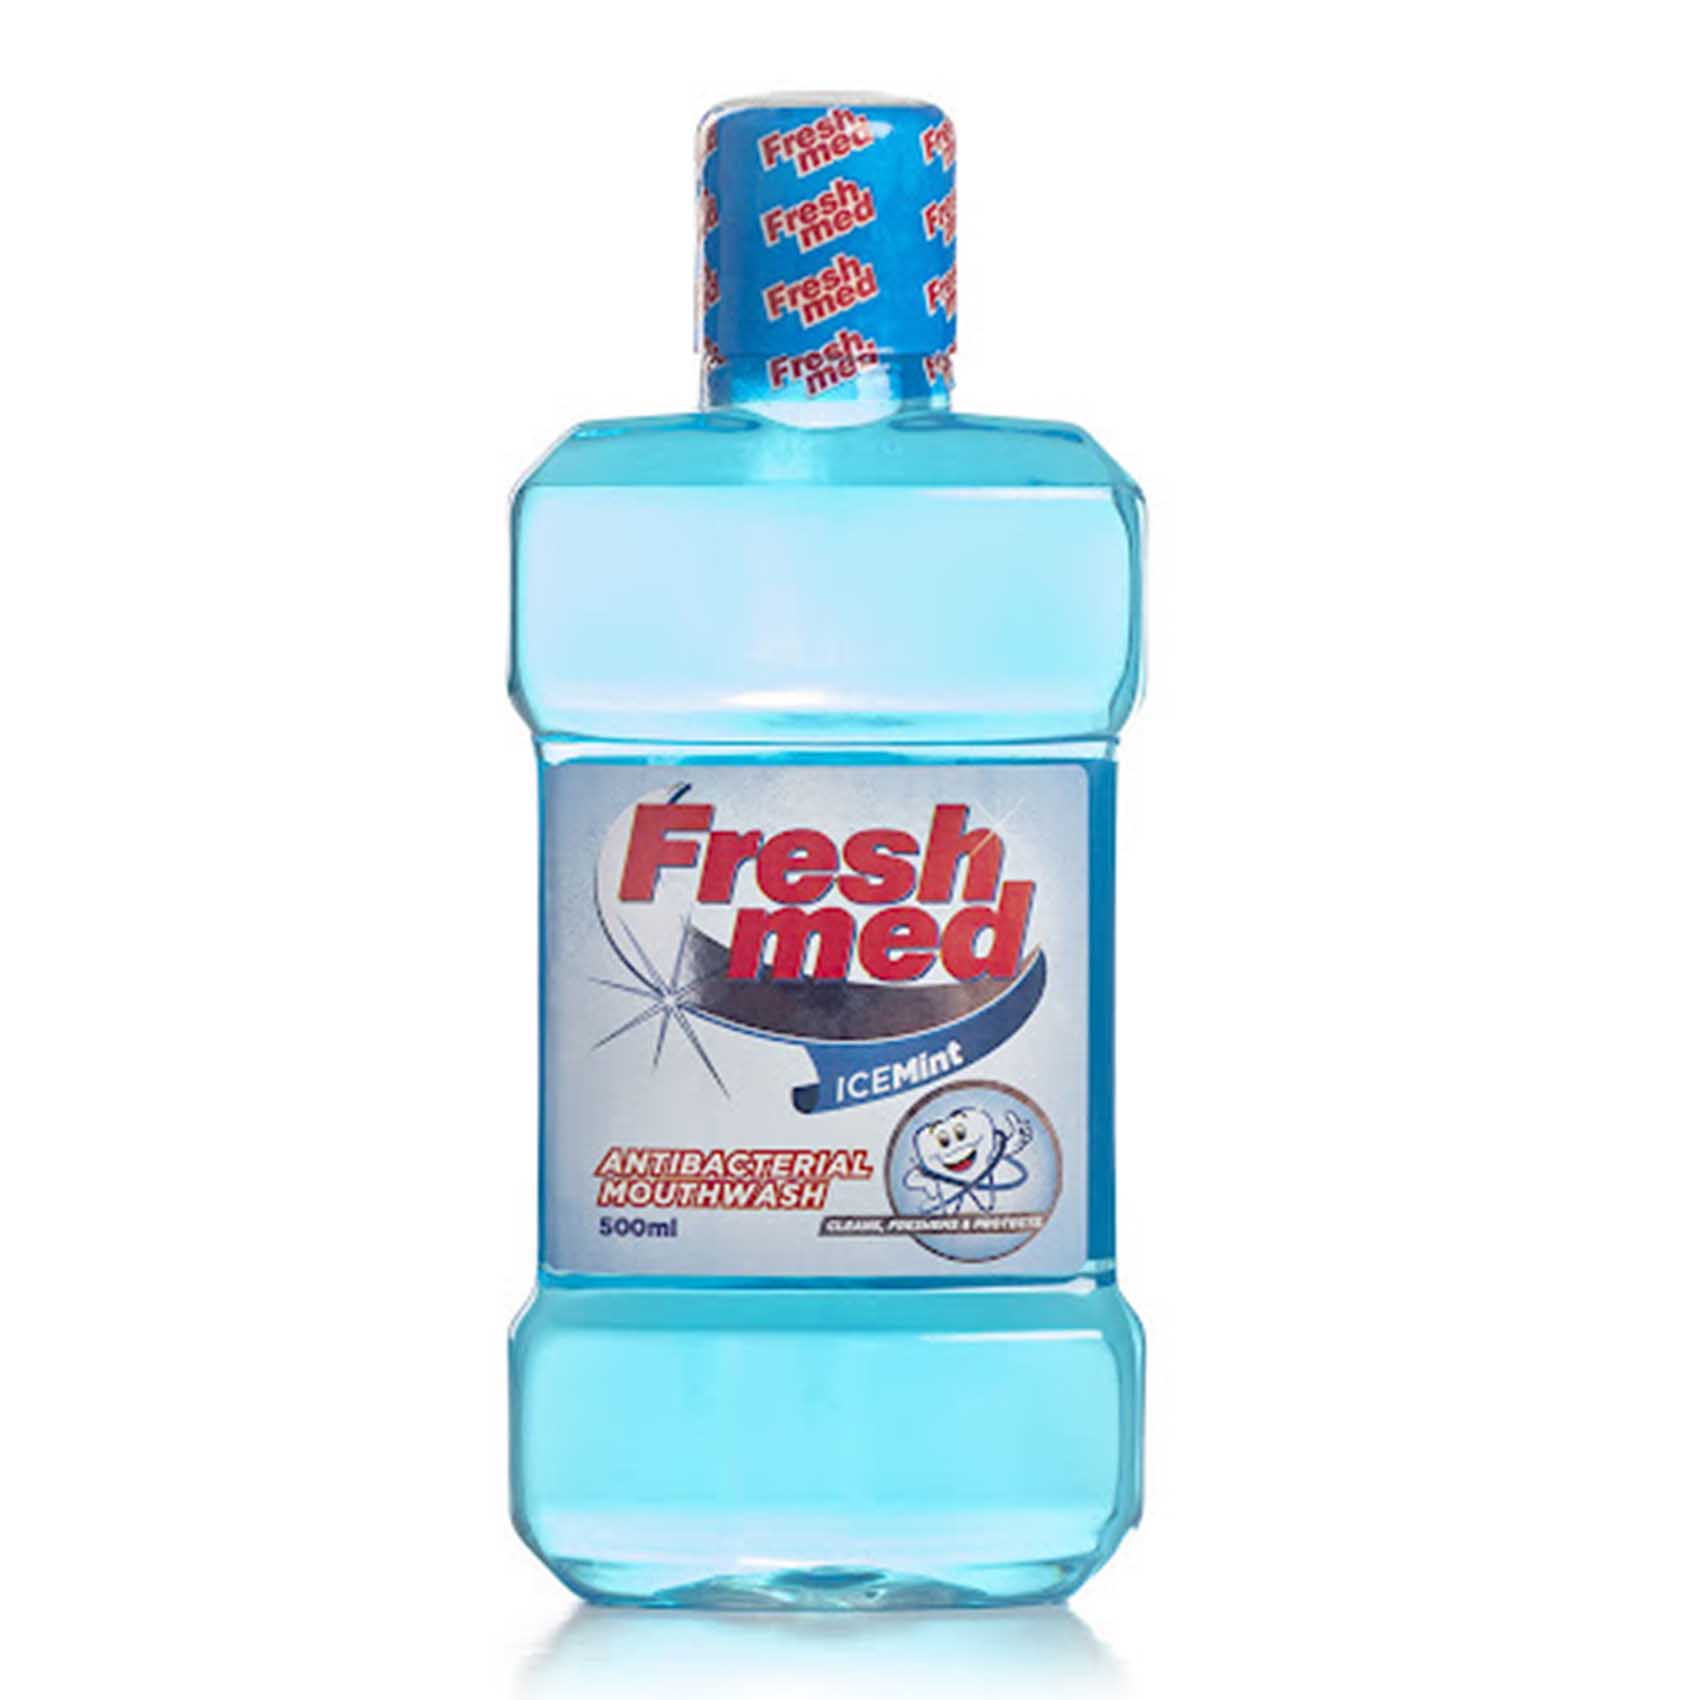 Freshmed Mouth Wash Icemint 500Ml